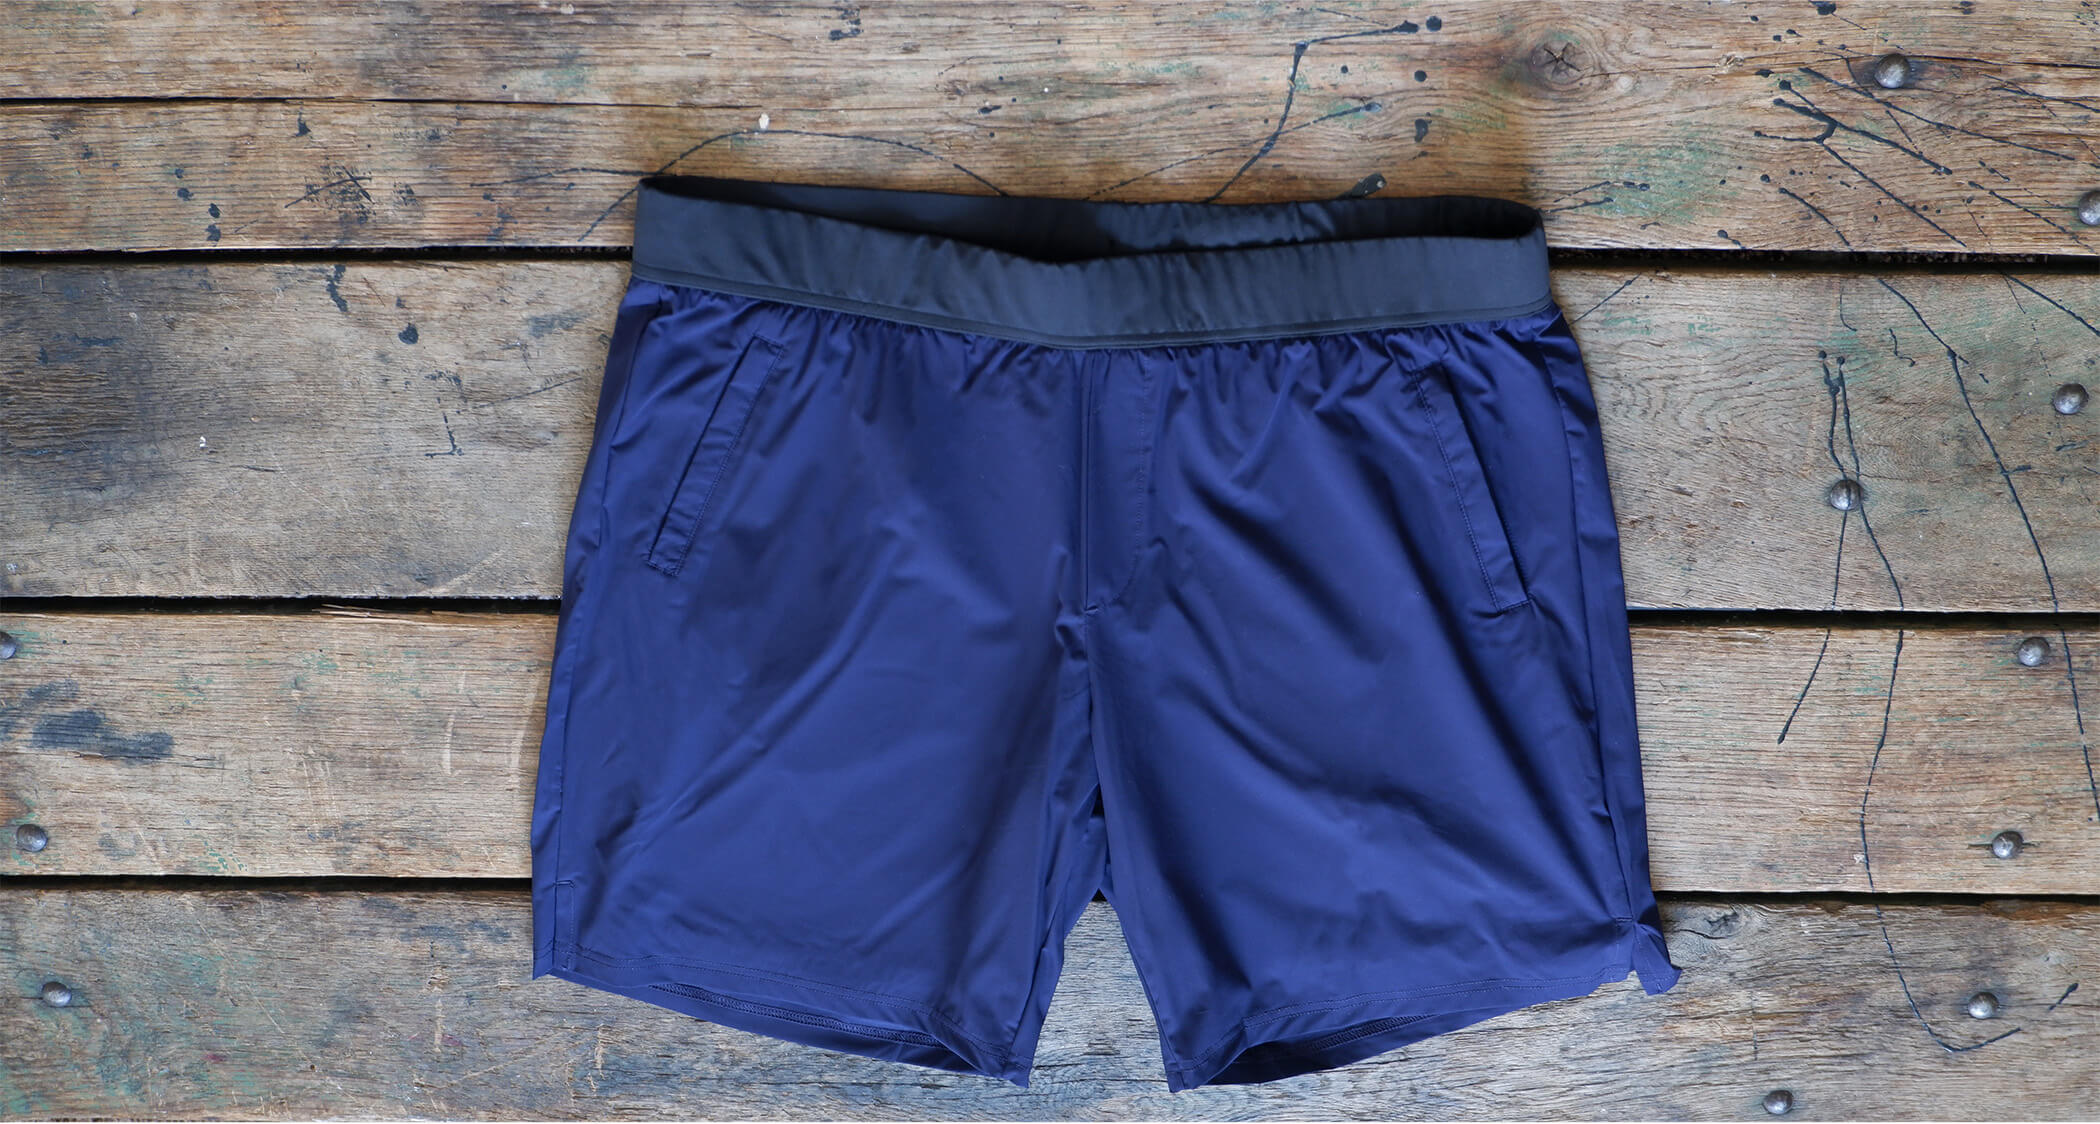 Reviewed: Kore Shorts and Bank Shorts, And A Better Alternative